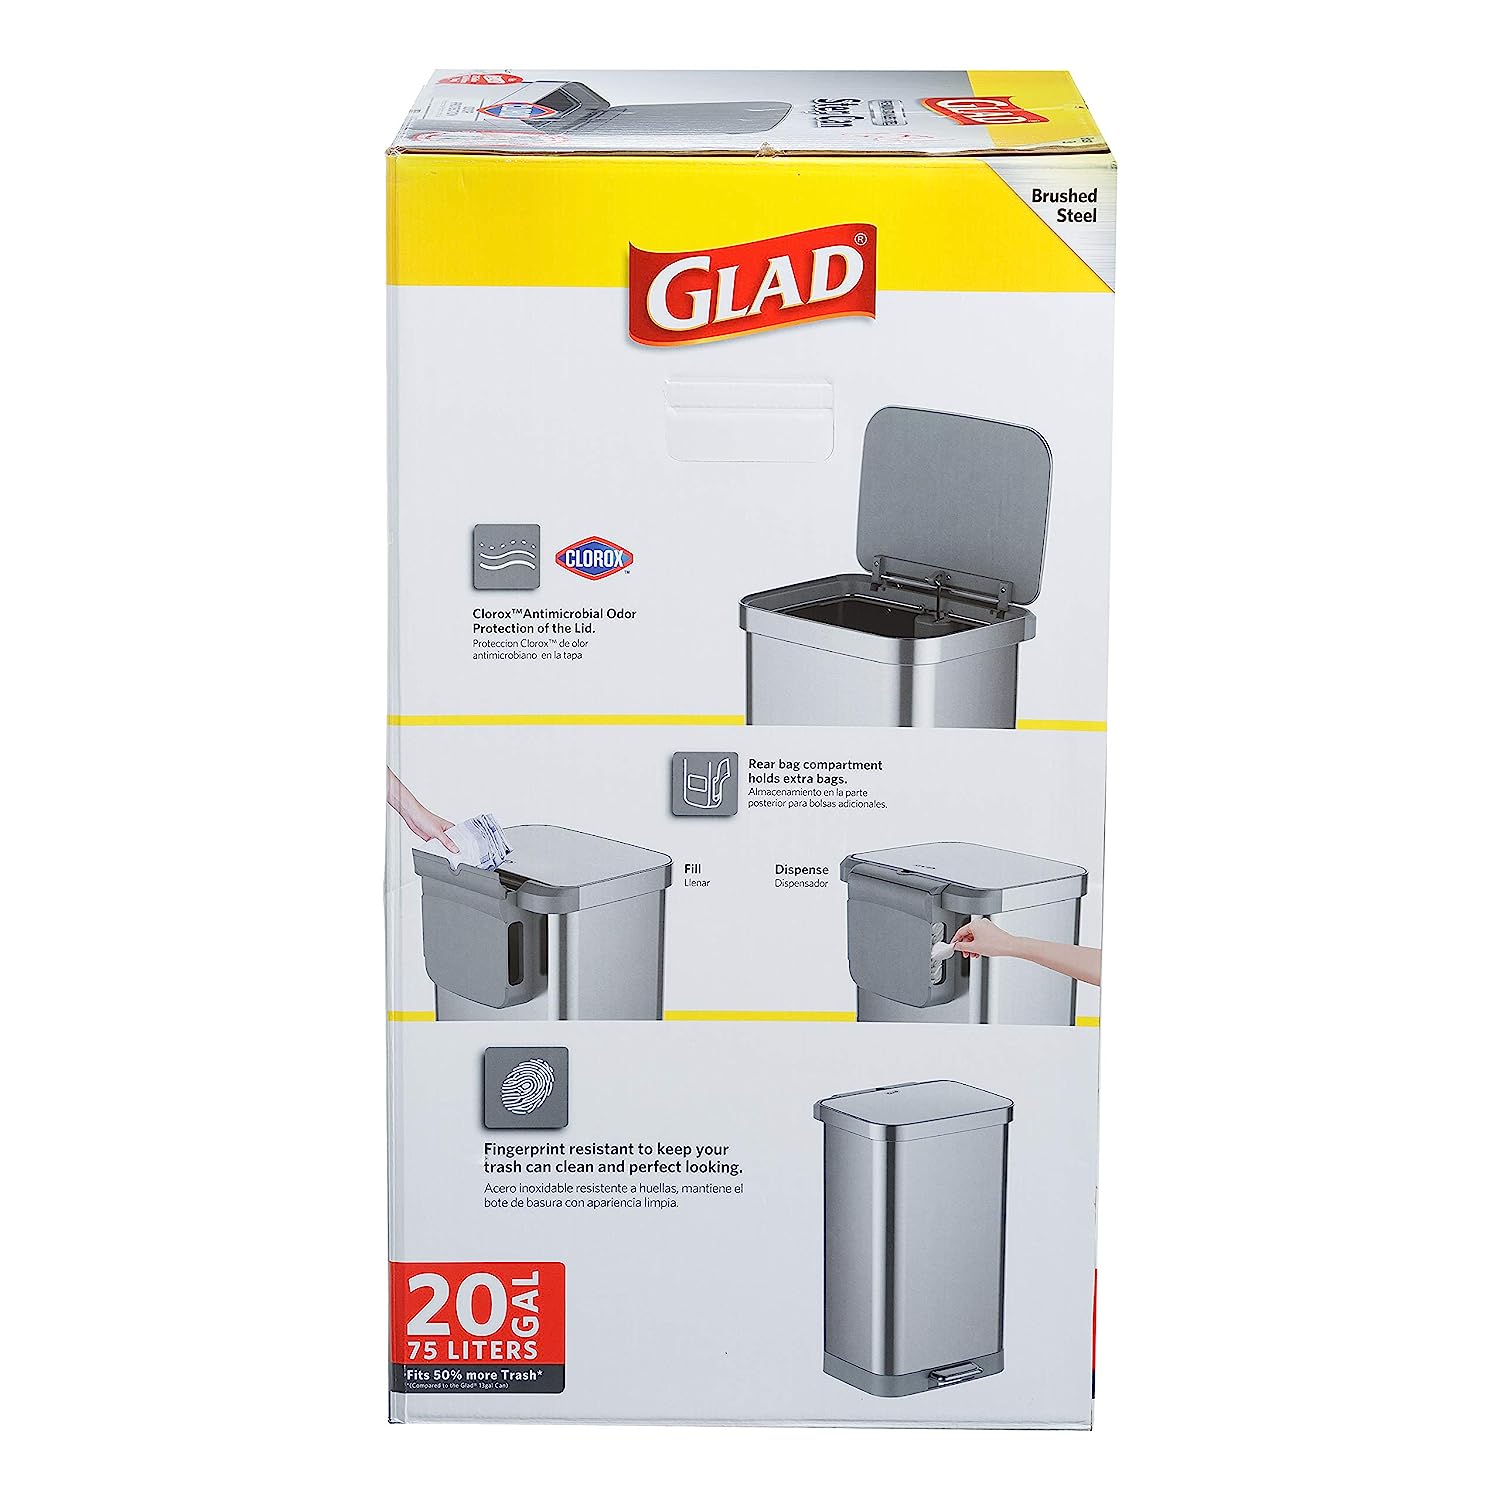 Glad Stainless Steel Step Trash Can w/ Clorox Odor Protection Large Metal  20gal 749732745079